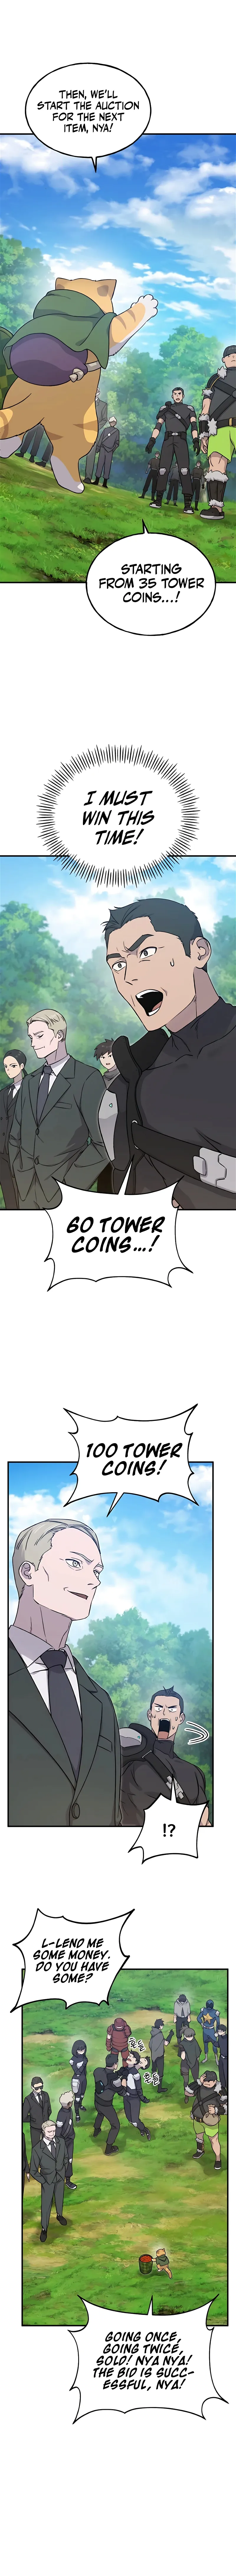 Solo Farming In The Tower Chapter 18 page 2